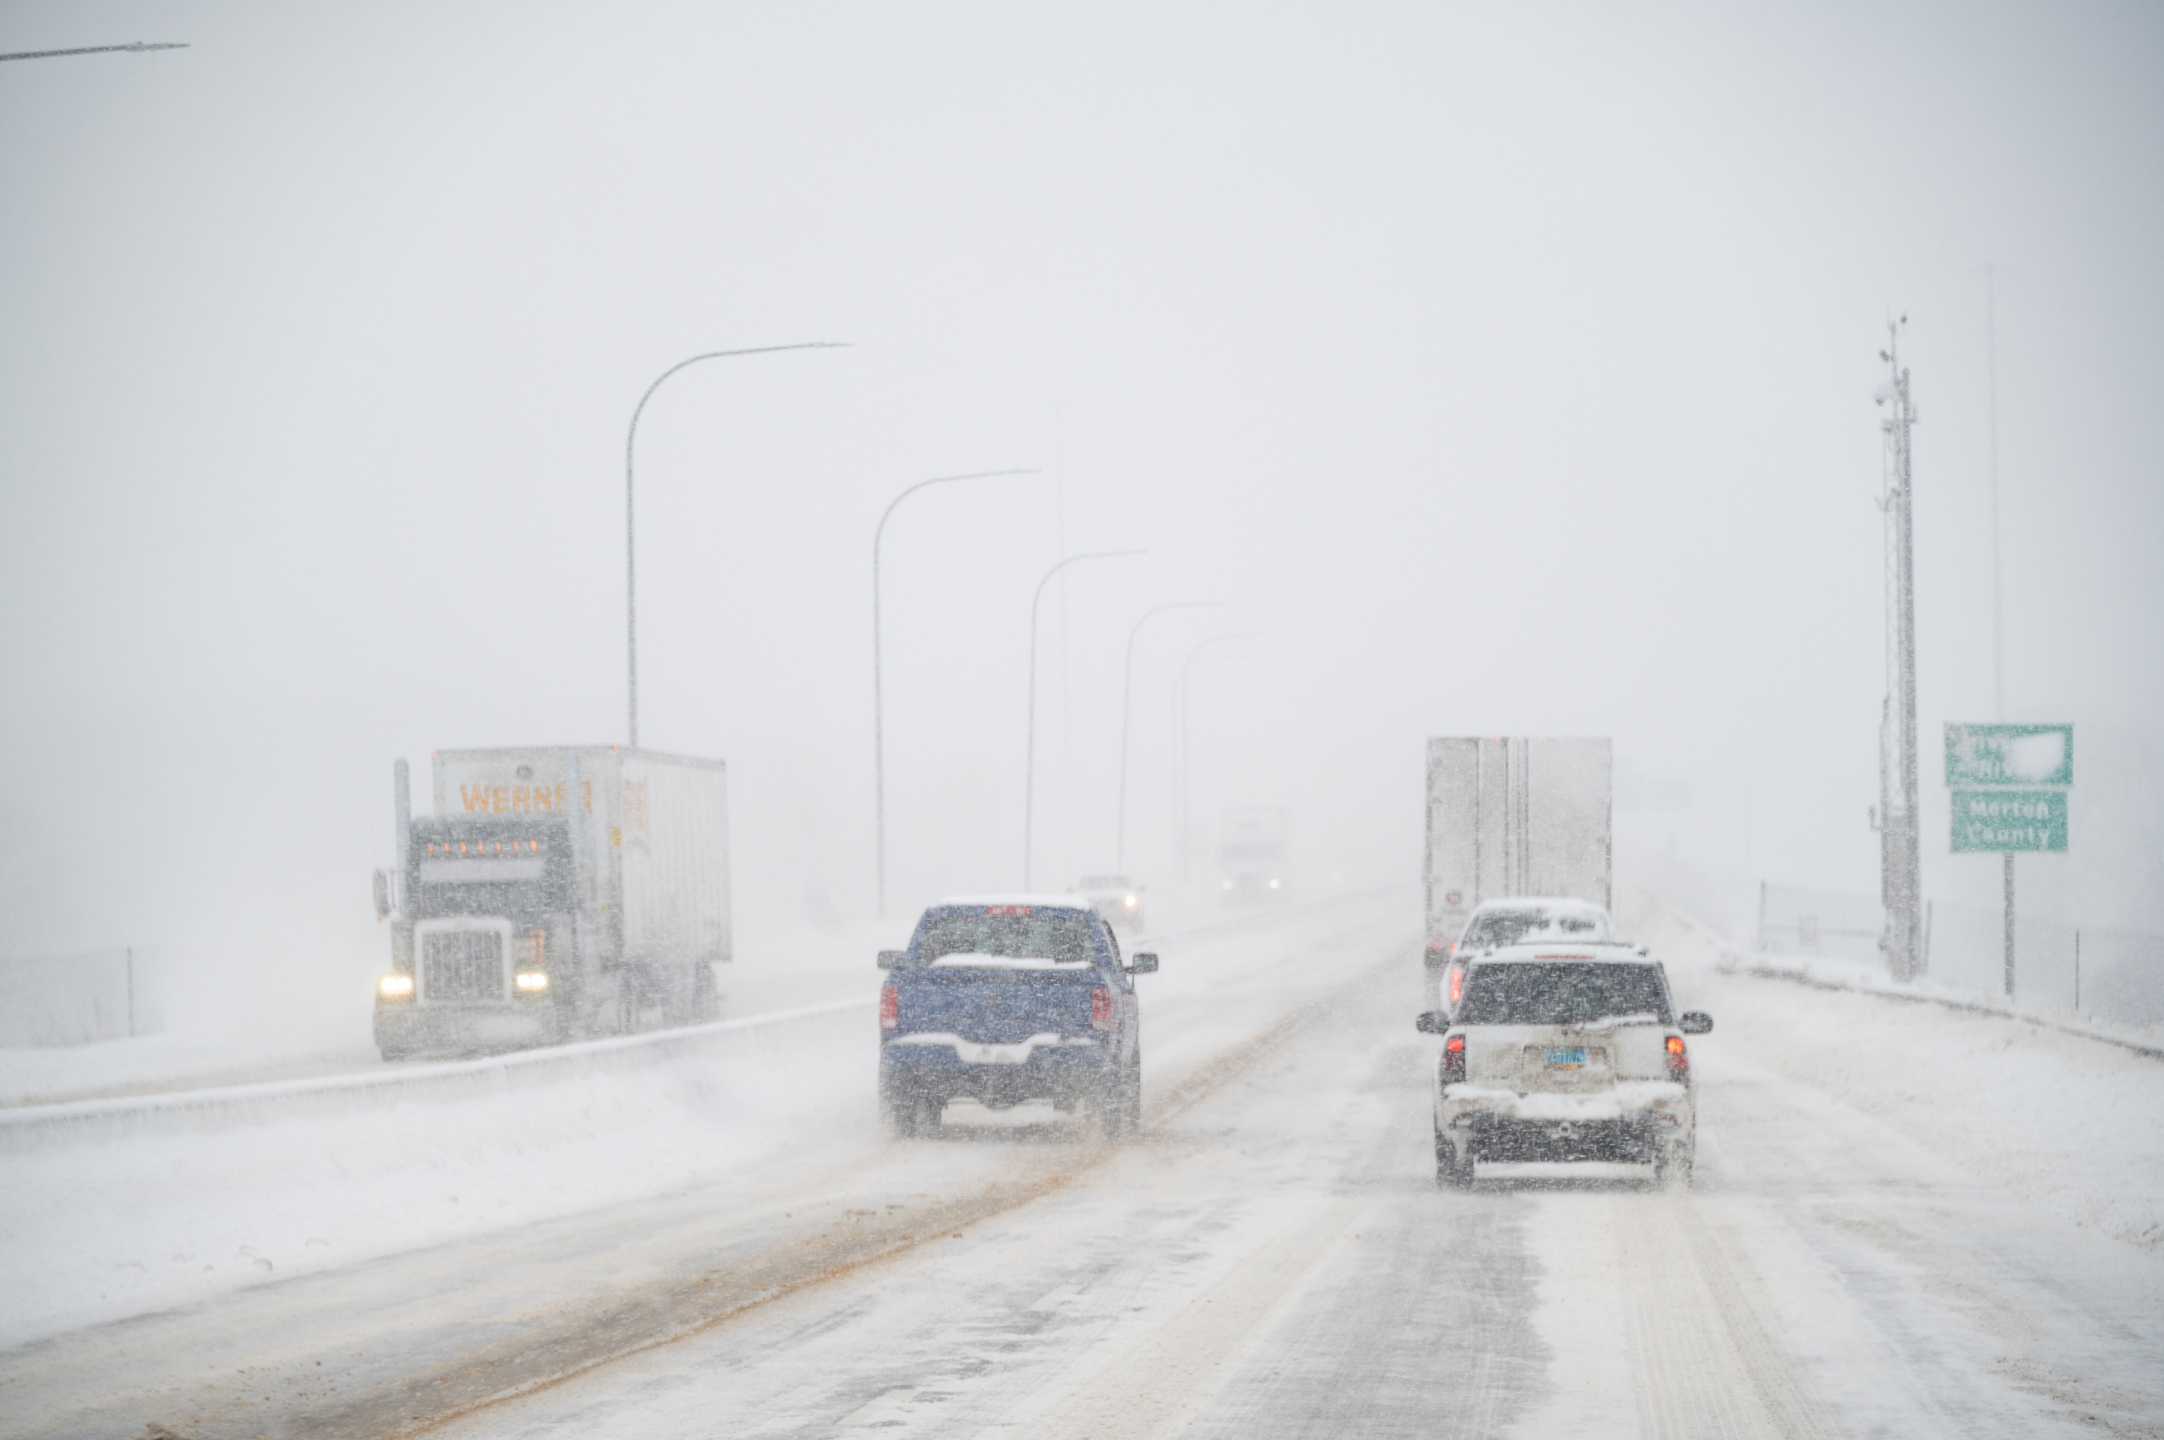 Cars and trucks driving on a snowy highway.